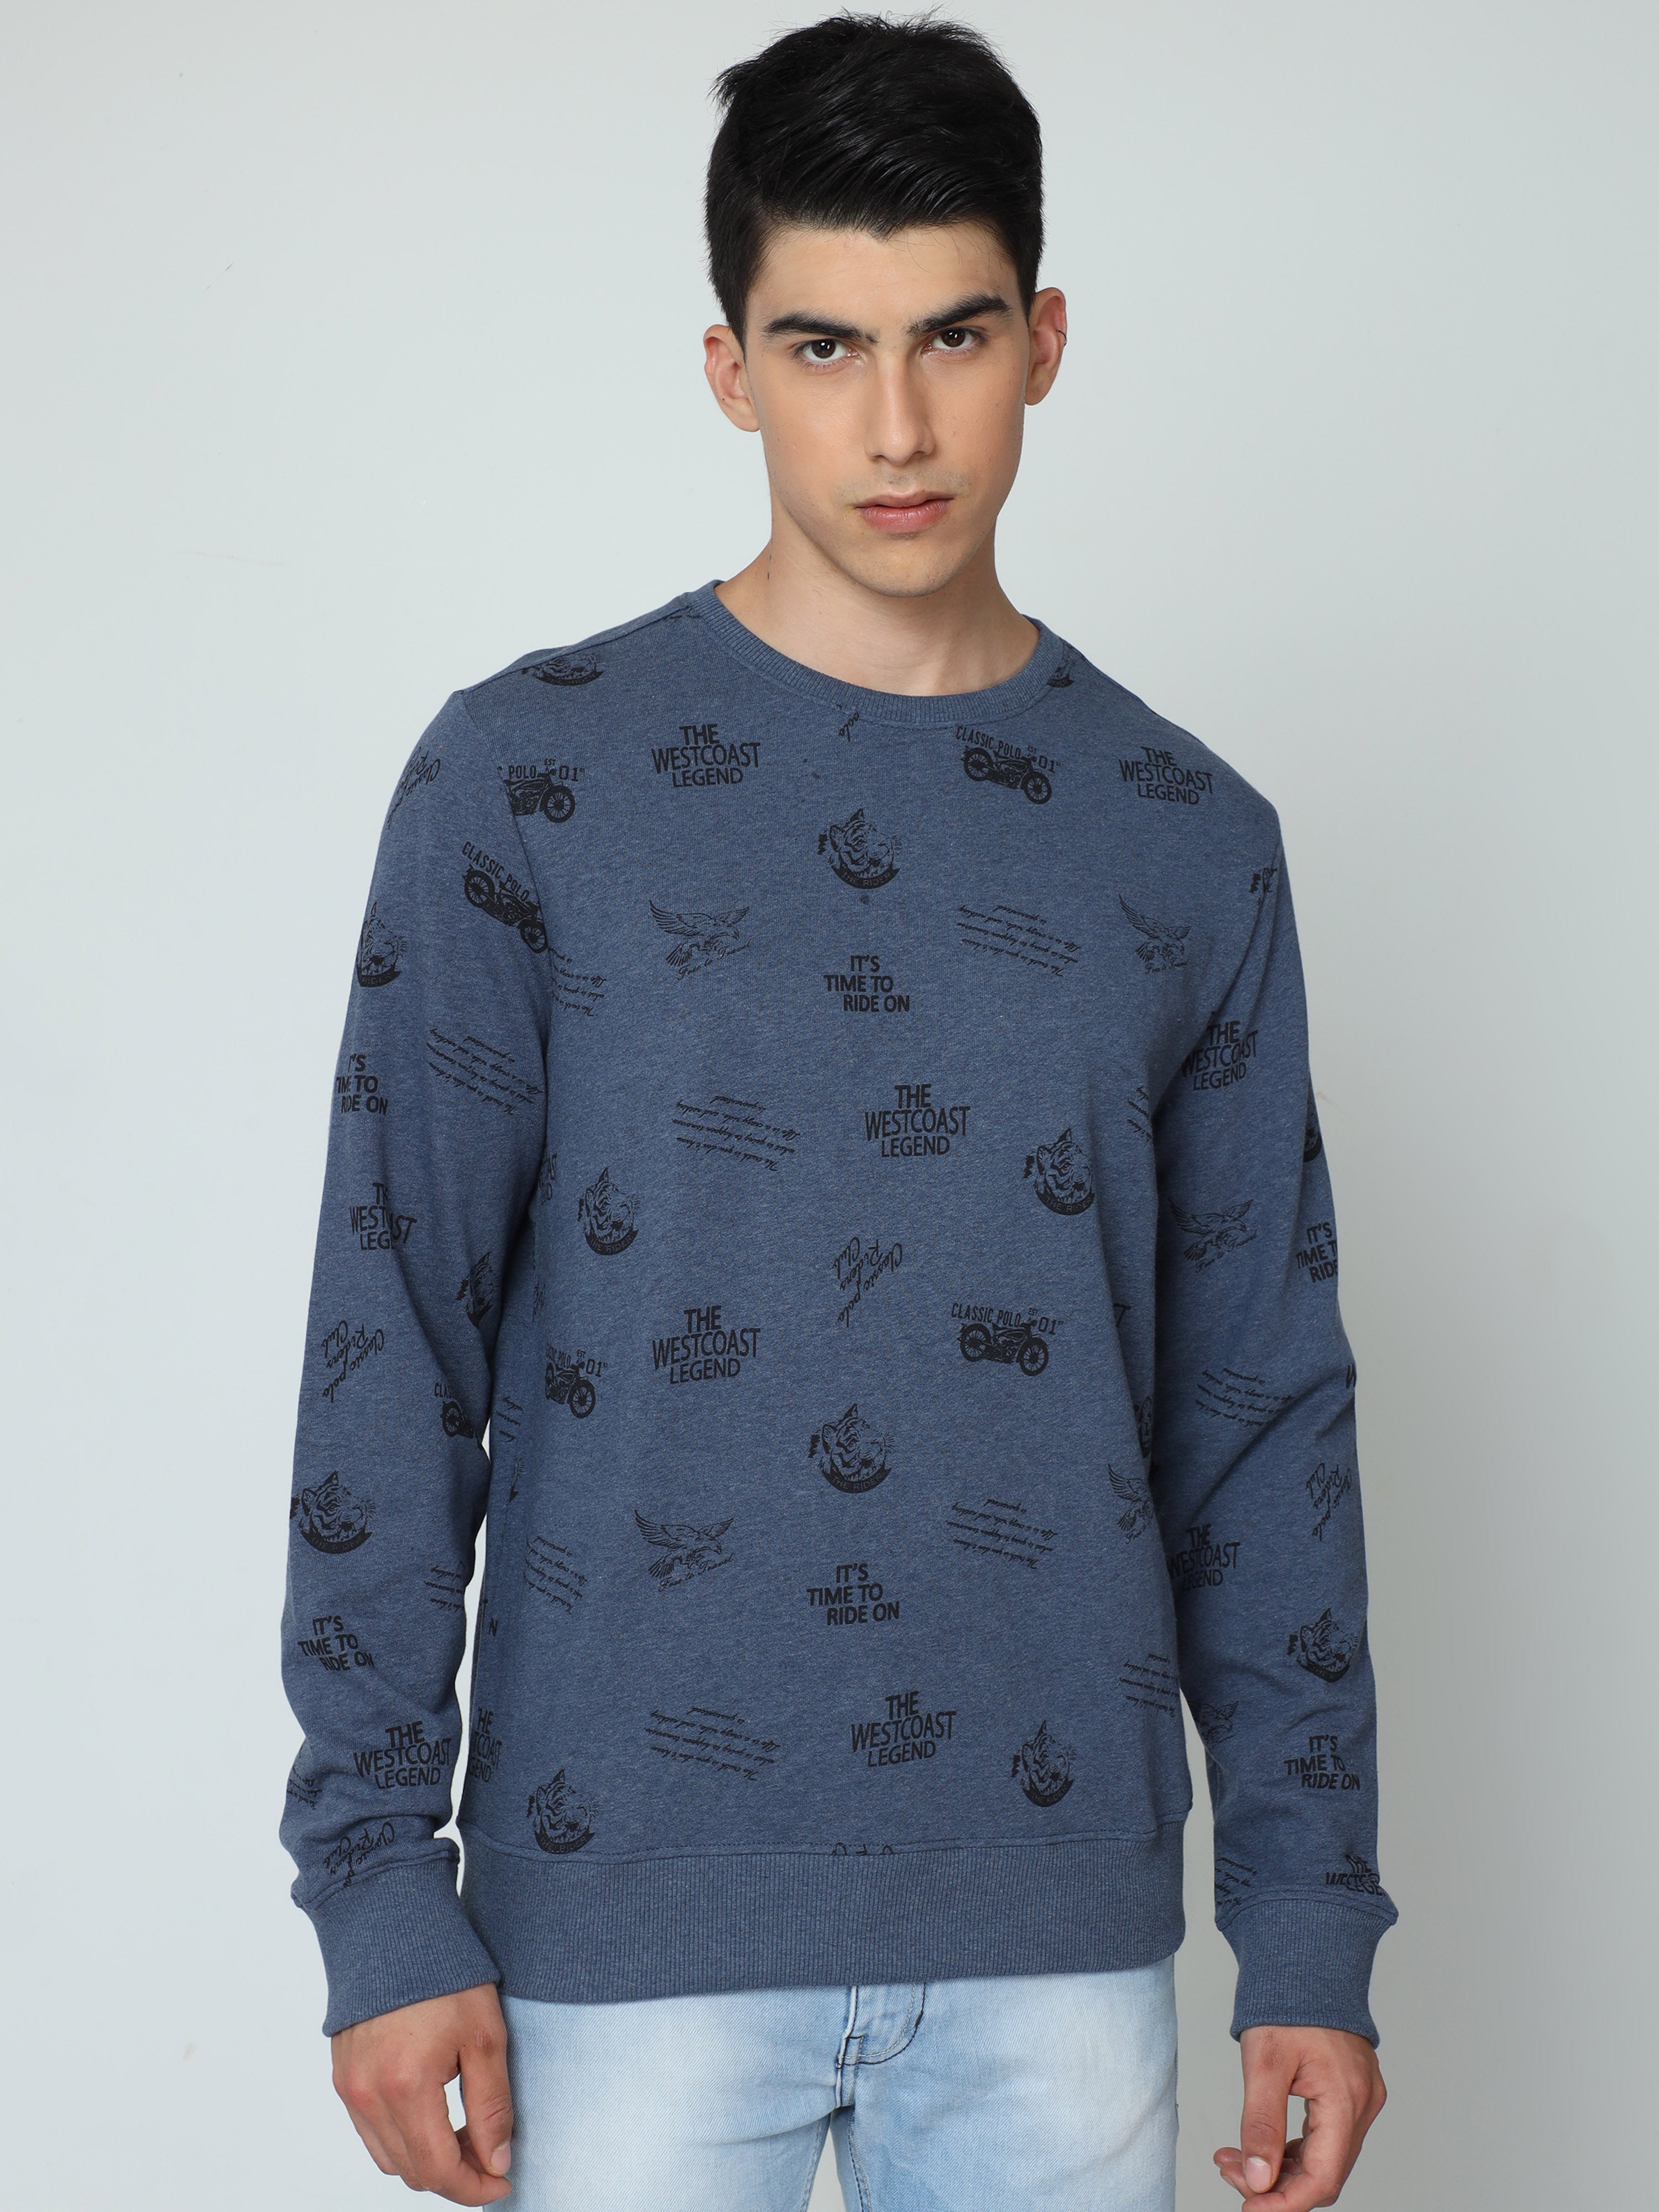 Classic Polo Mens 100% Cotton Blue Printed Crew Neck Full Sleeves Slim Fit Sweat Shirt |Cp-Ss-10